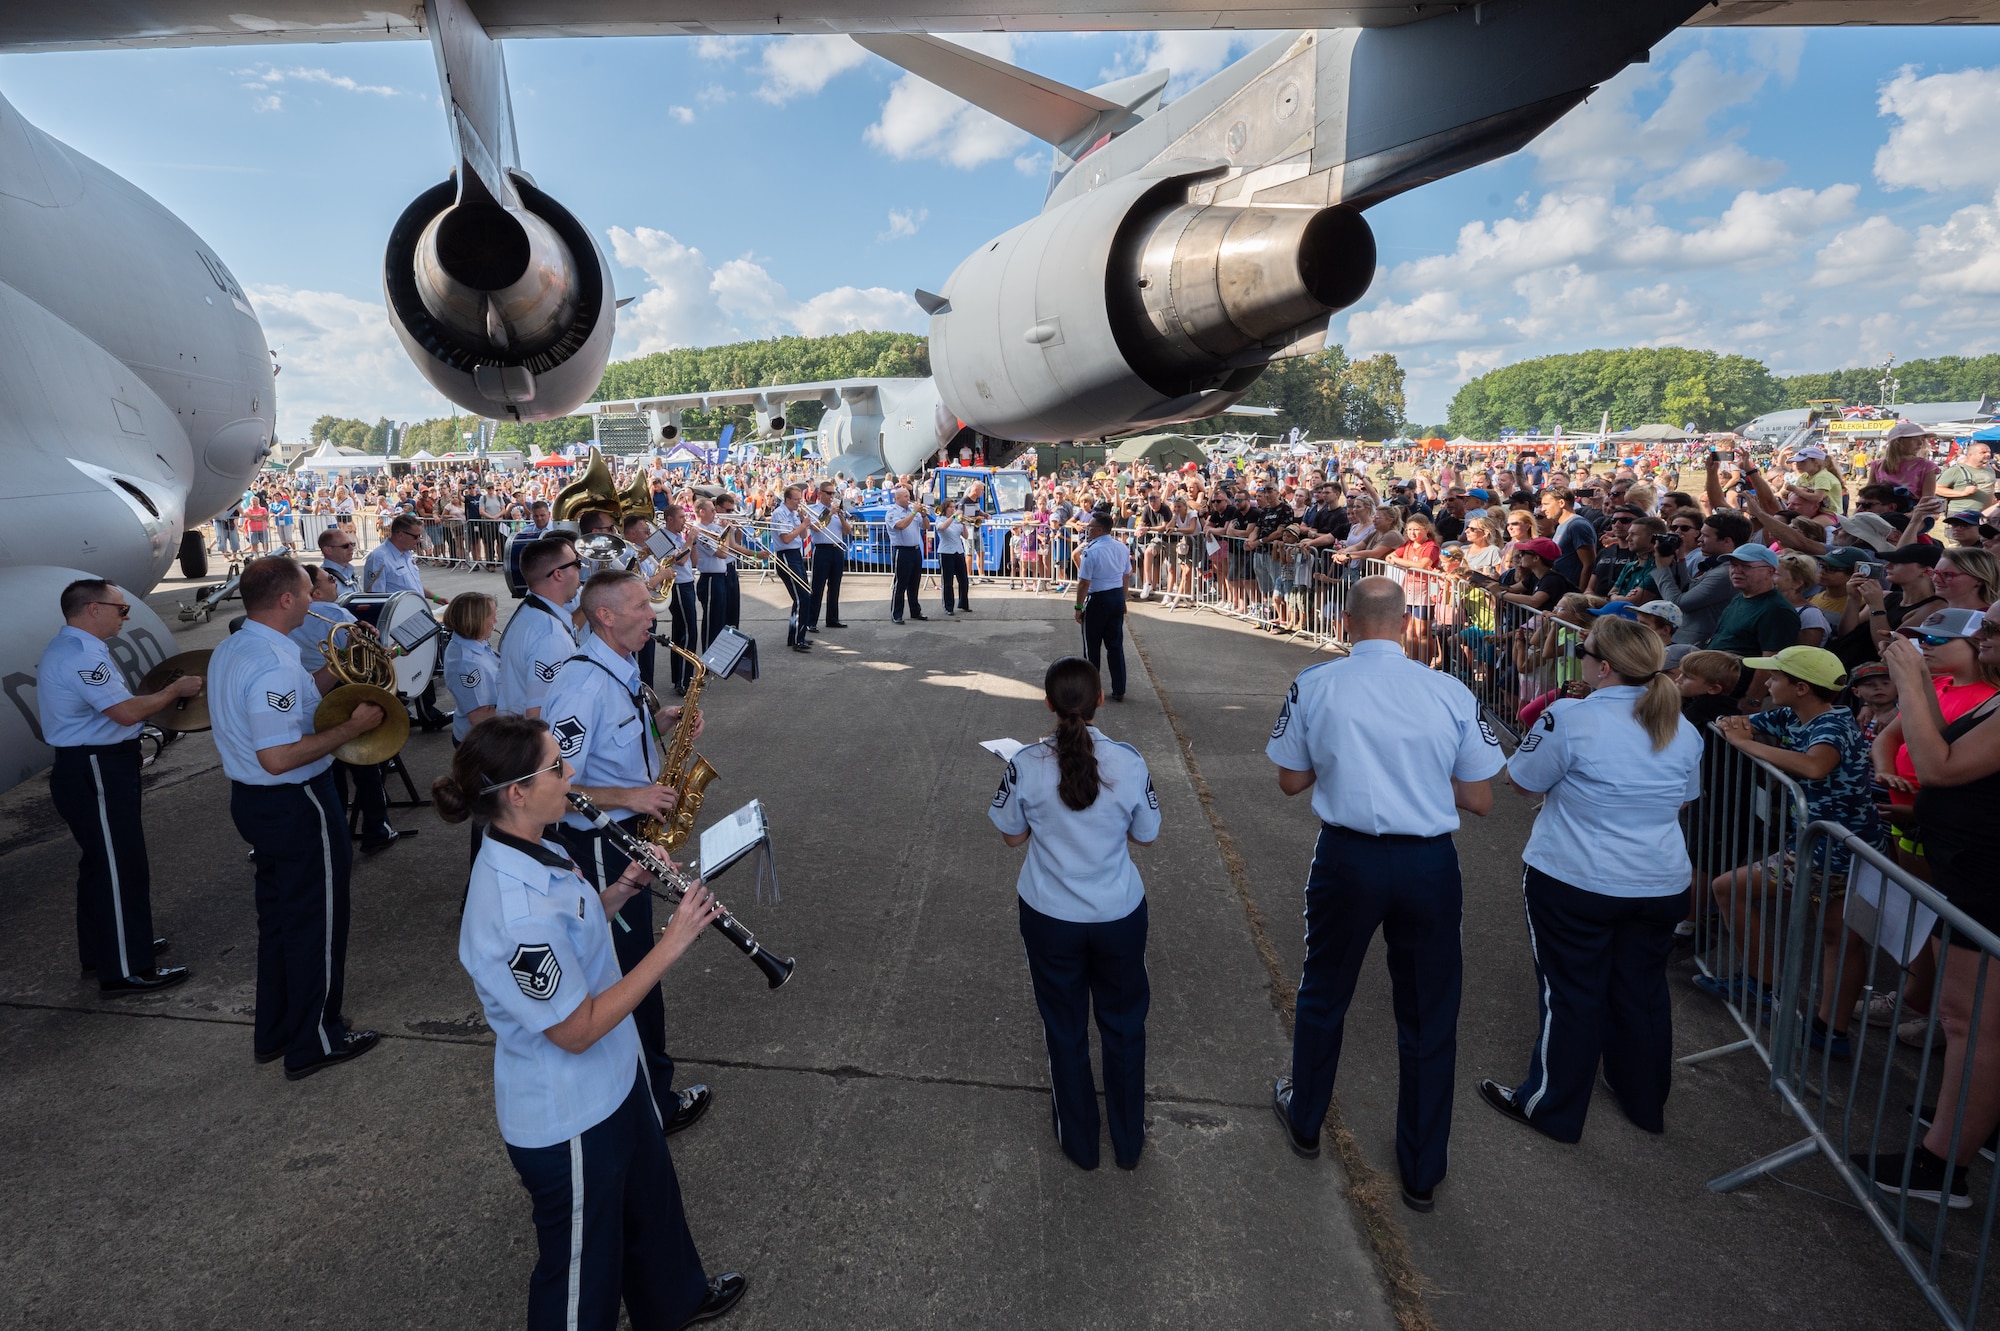 U.S. Air Force Airmen assigned to the U.S. Air Forces in Europe Ceremonial Band, perform during the NATO Days event at Leoš Janáček Airport in Ostrava, Czech Republic, Sept. 17, 2023.